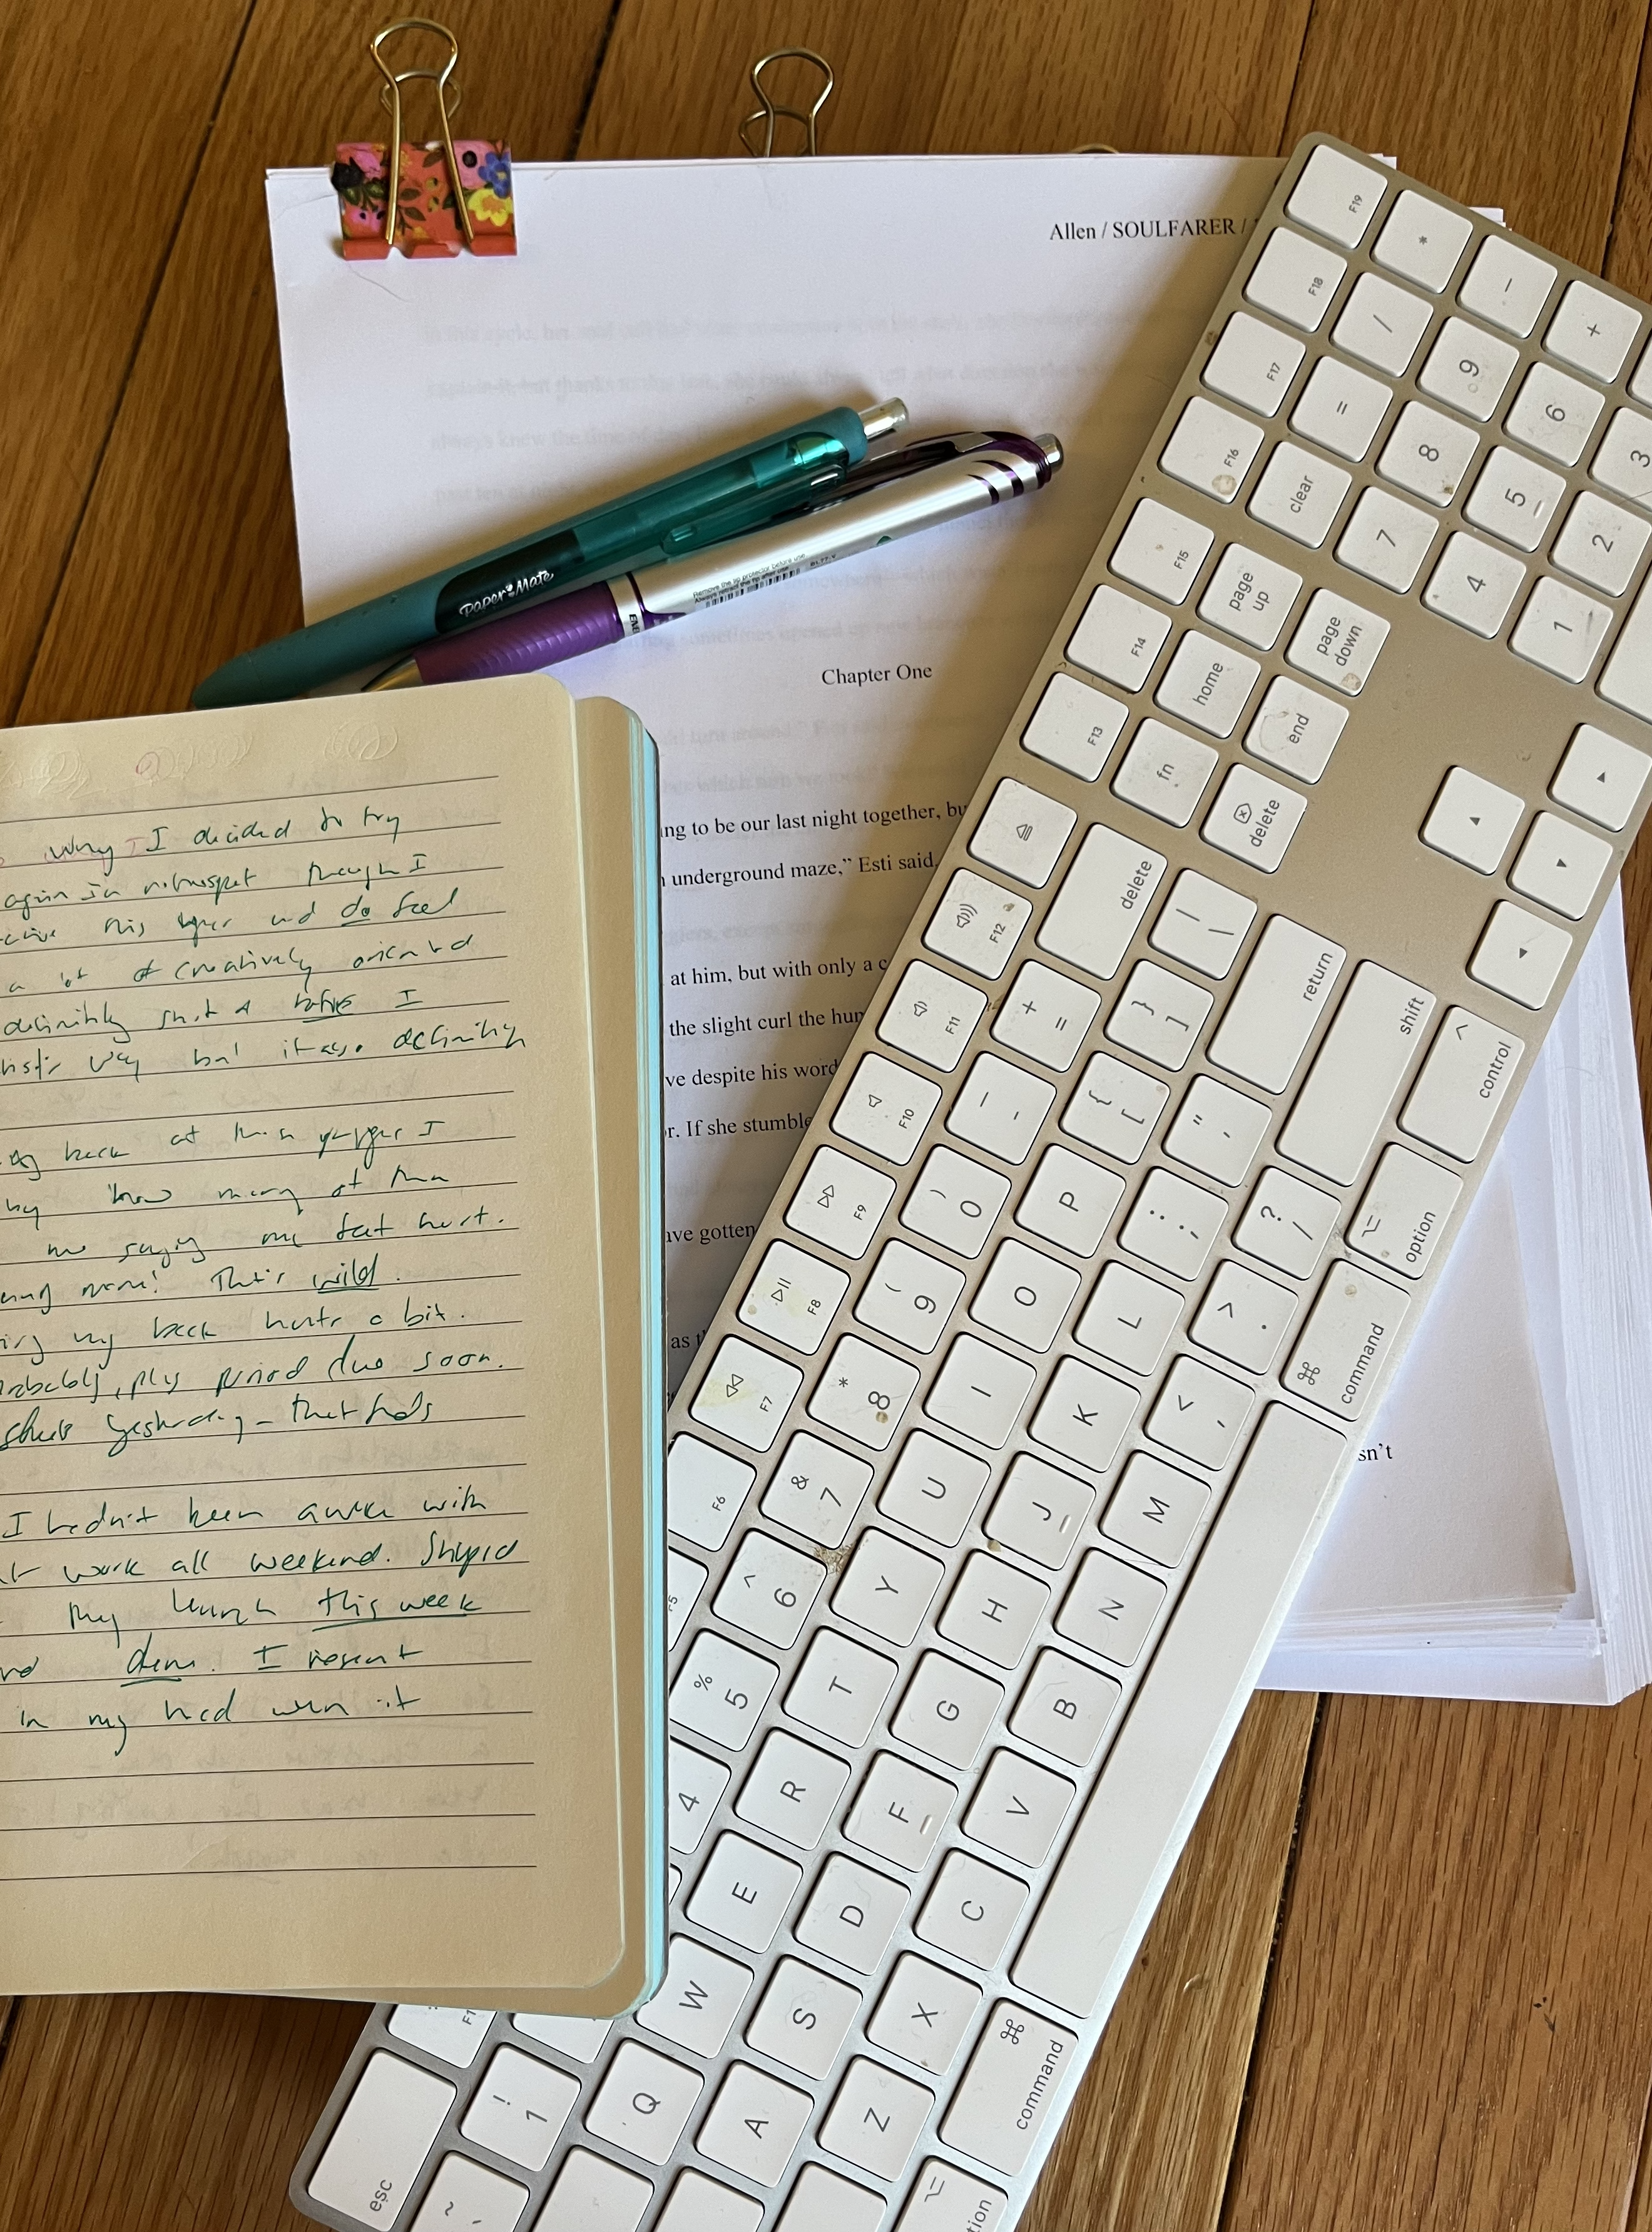 A collage on a wooden floor: A thick packet of papers (a printed manuscript), pens, a keyboard, and an open notebook